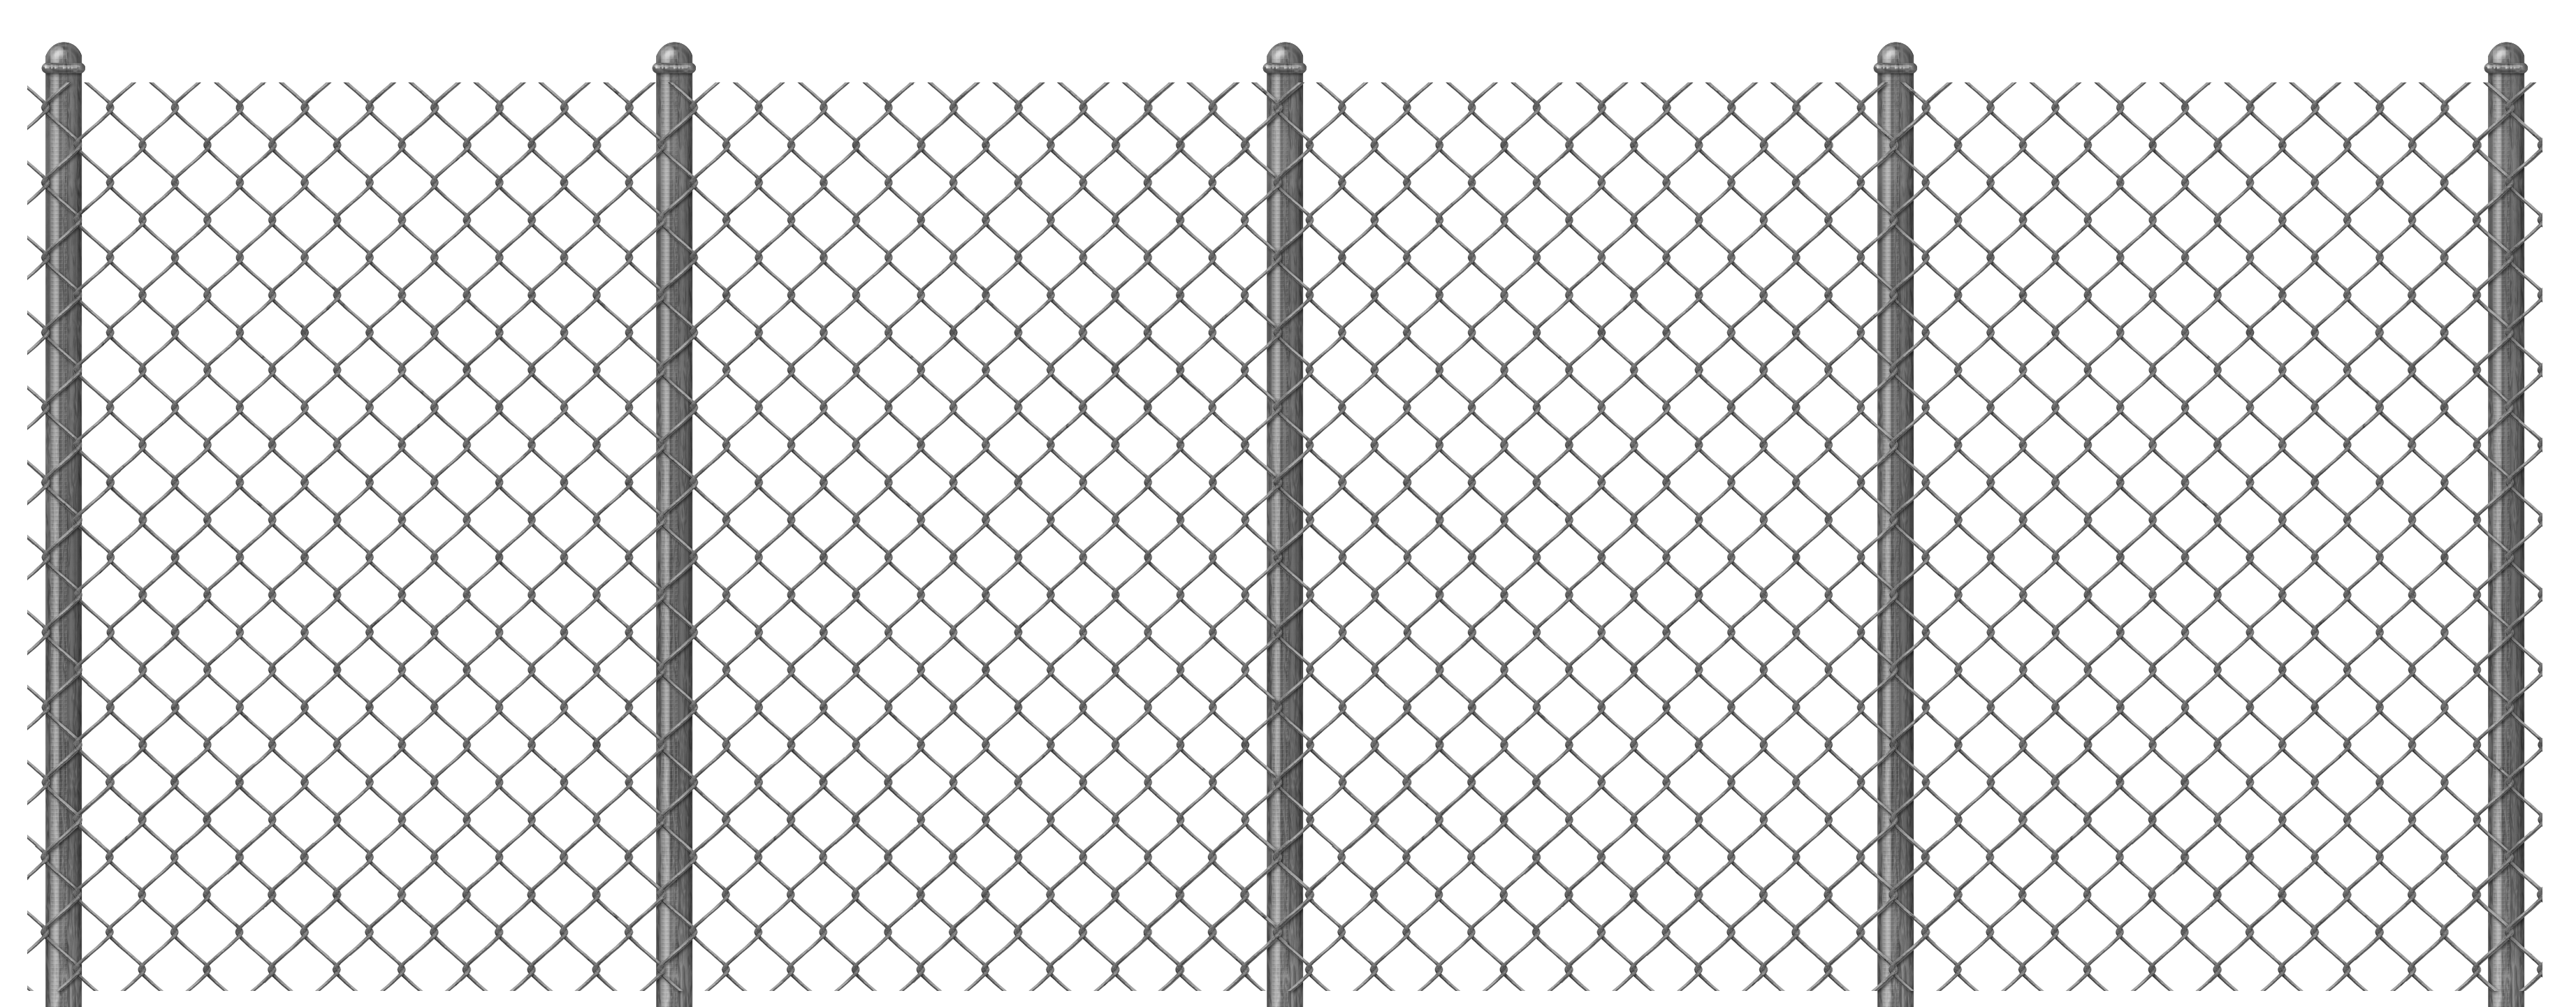 Chain Link Mesh Png / Barbed wire concertina wire illustration, 5 wire ...